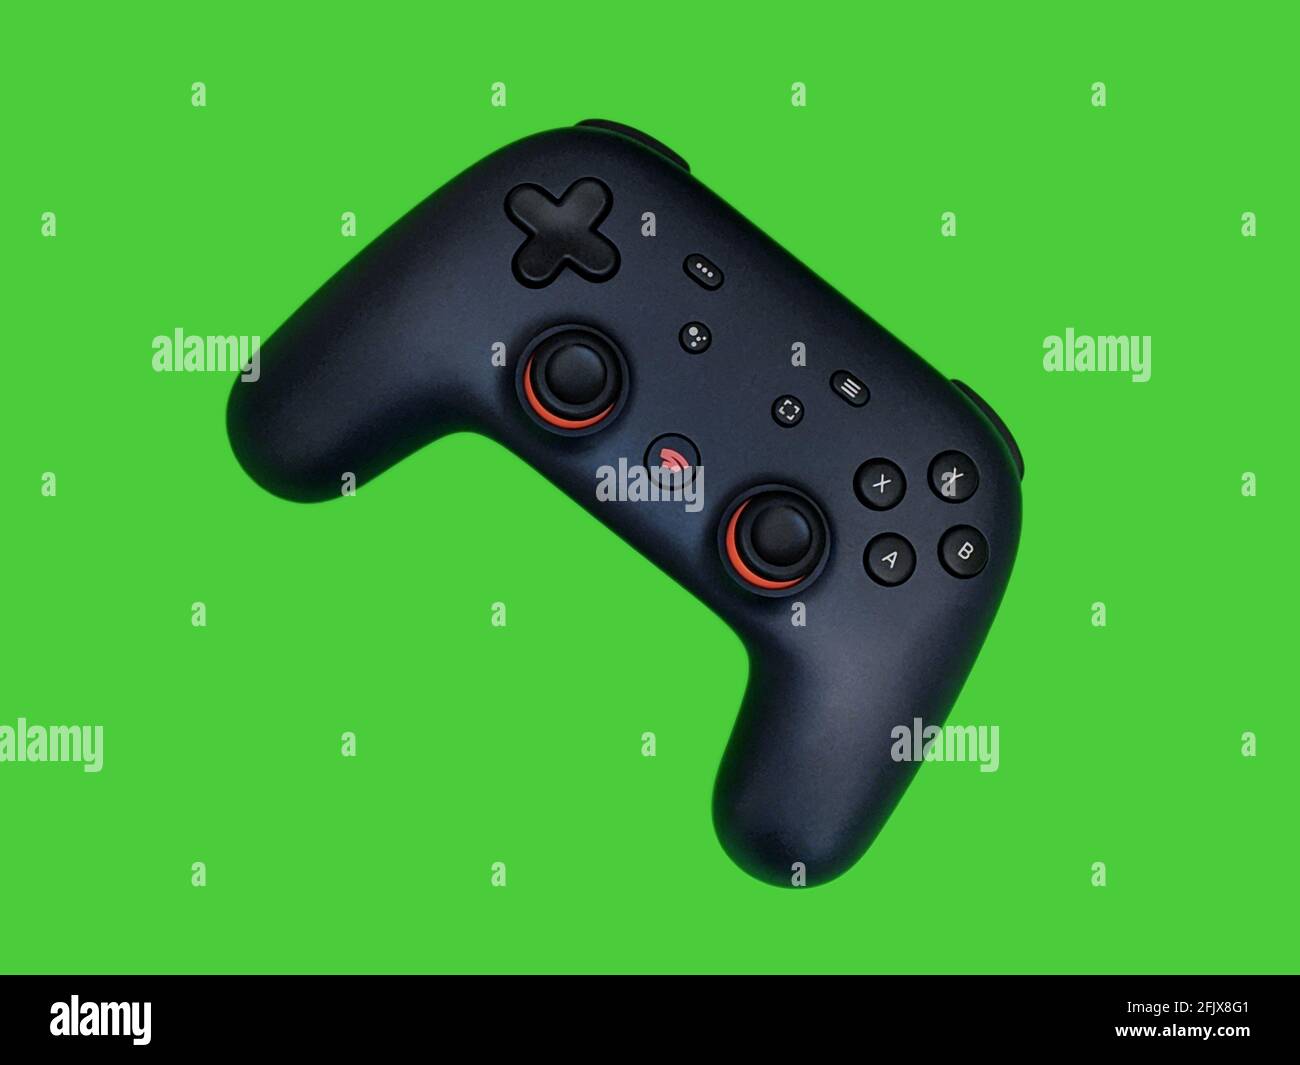 Seattle, WA / USA - circa November 2019: Closeup of a Google Stadia gaming controller against a colorful background Stock Photo